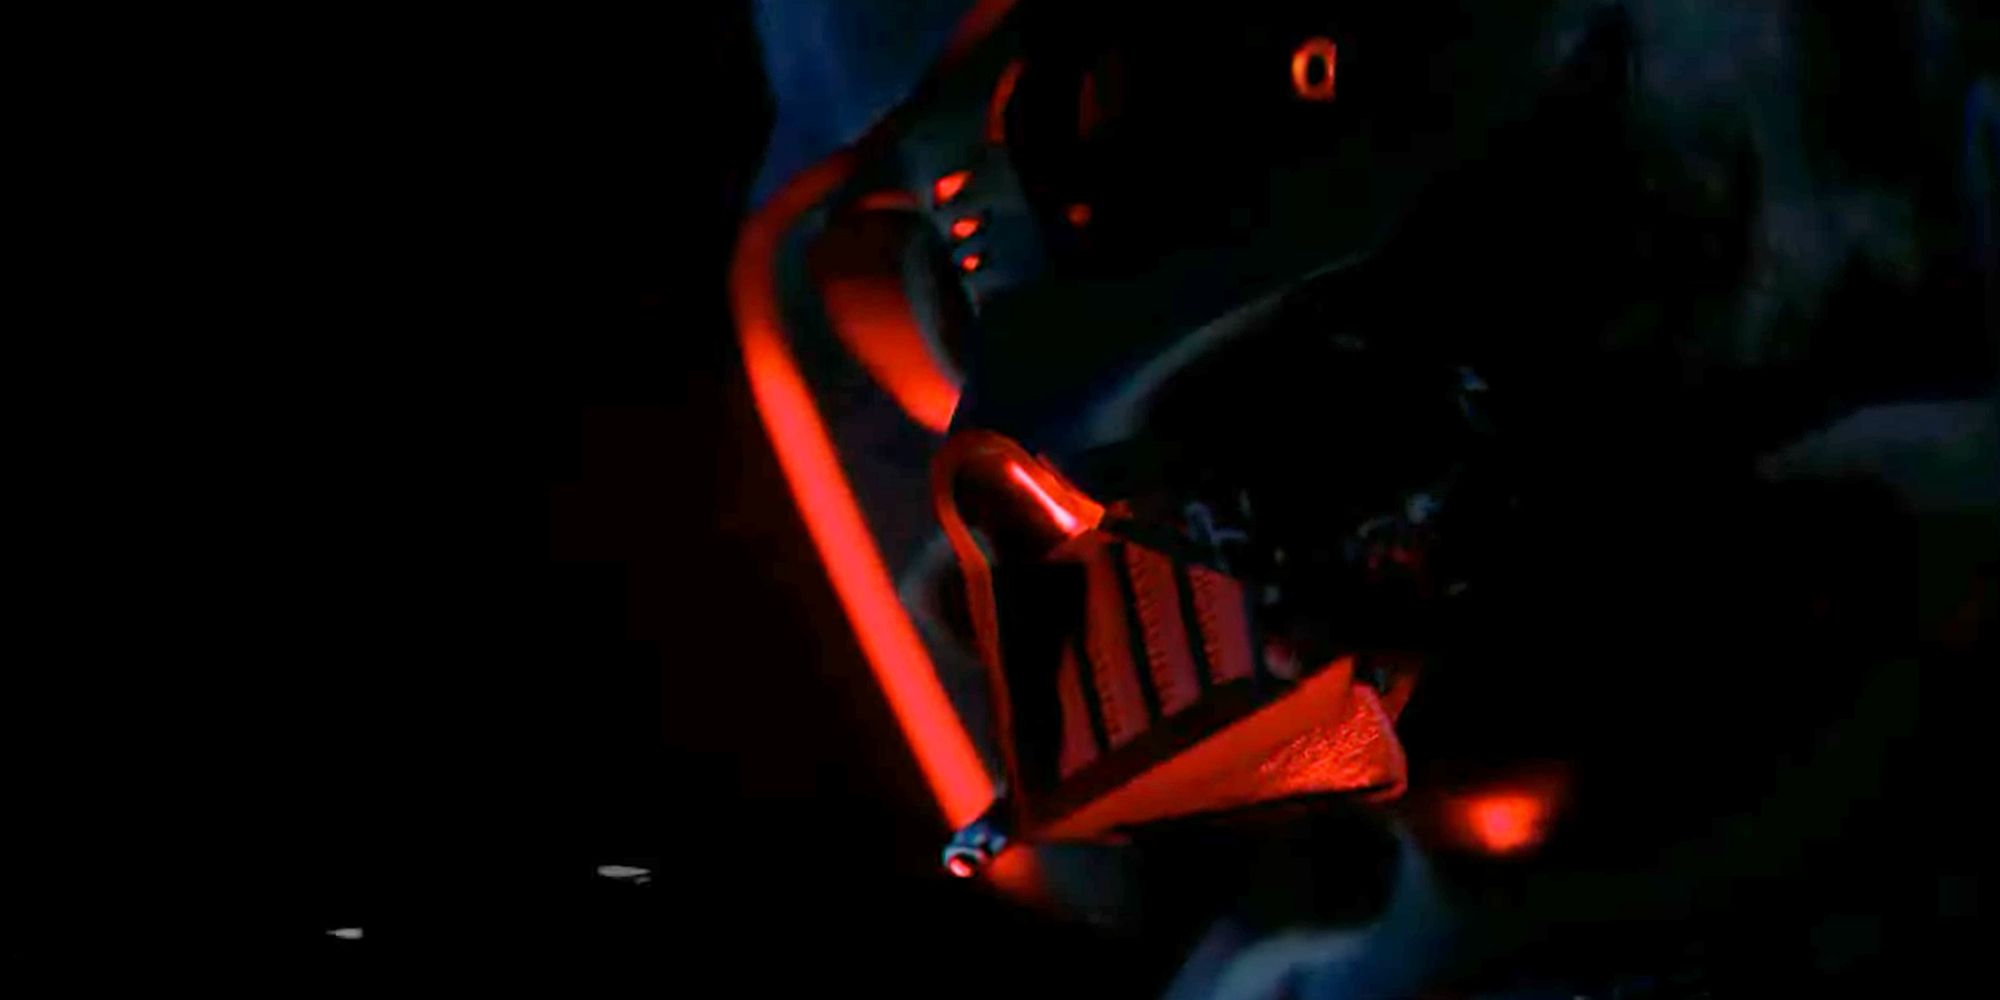 Fan-Made Star Wars horror game screenshot of zombie Darth Vader in the dark, slightly illuminated by his red lightsaber